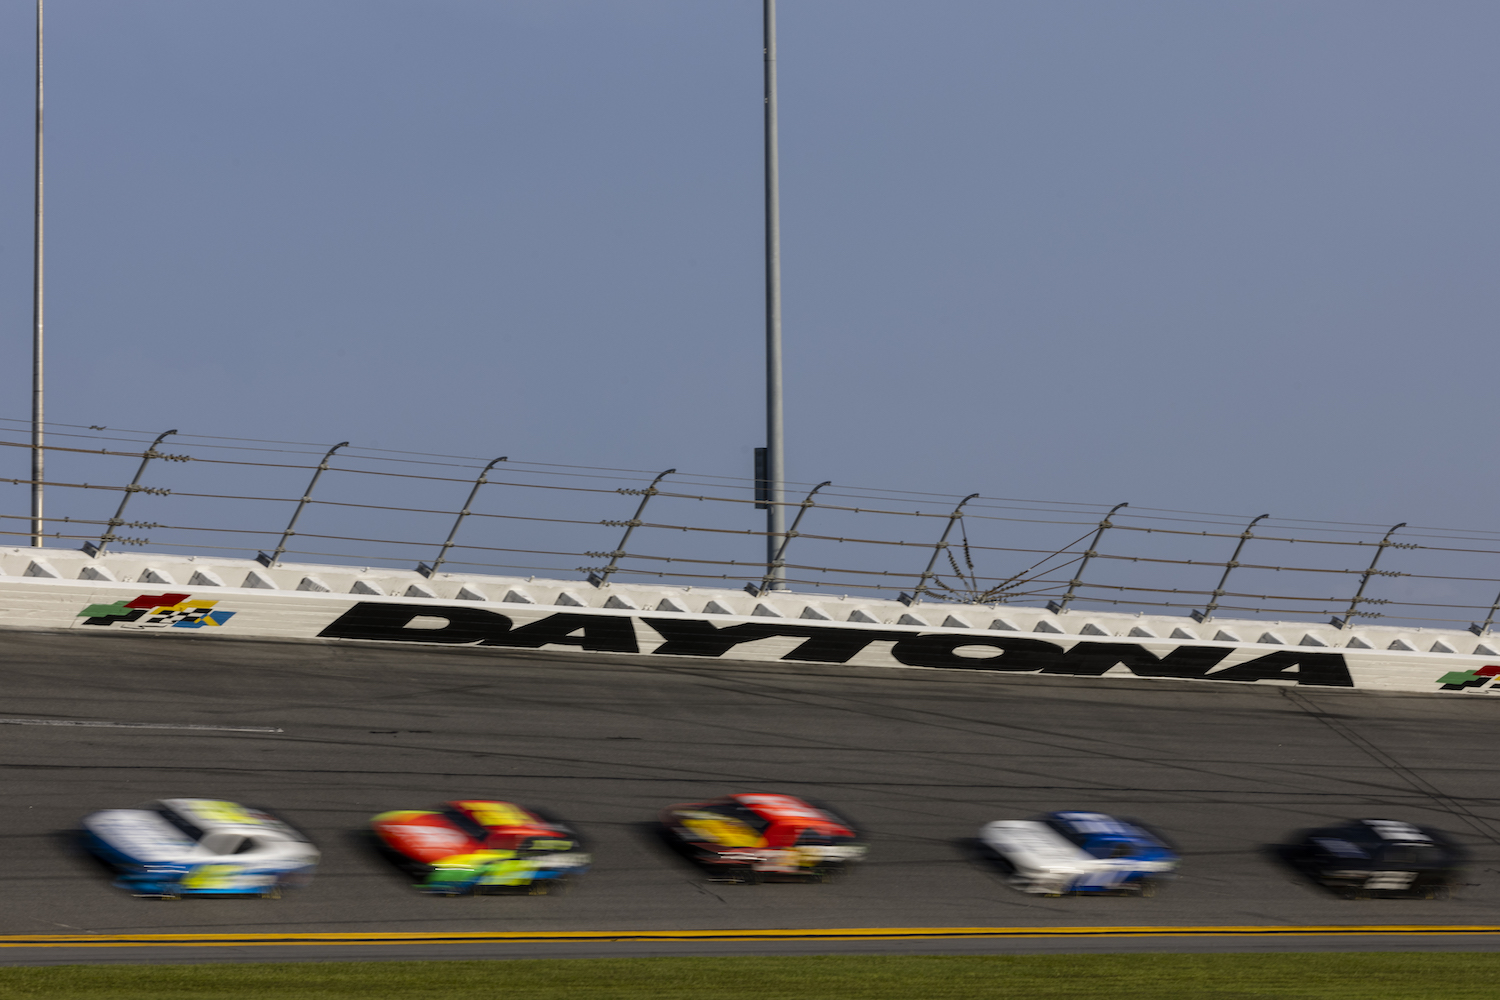 This is a pack of NASCAR Next Generation Cars participating in the drafting test at the Daytona International Speedway. Nascar Tries To Keep Drivers From Cooking Like ‘Turkeys’ Inside the Next Gen Race Car. | James Gilbert/Getty Images